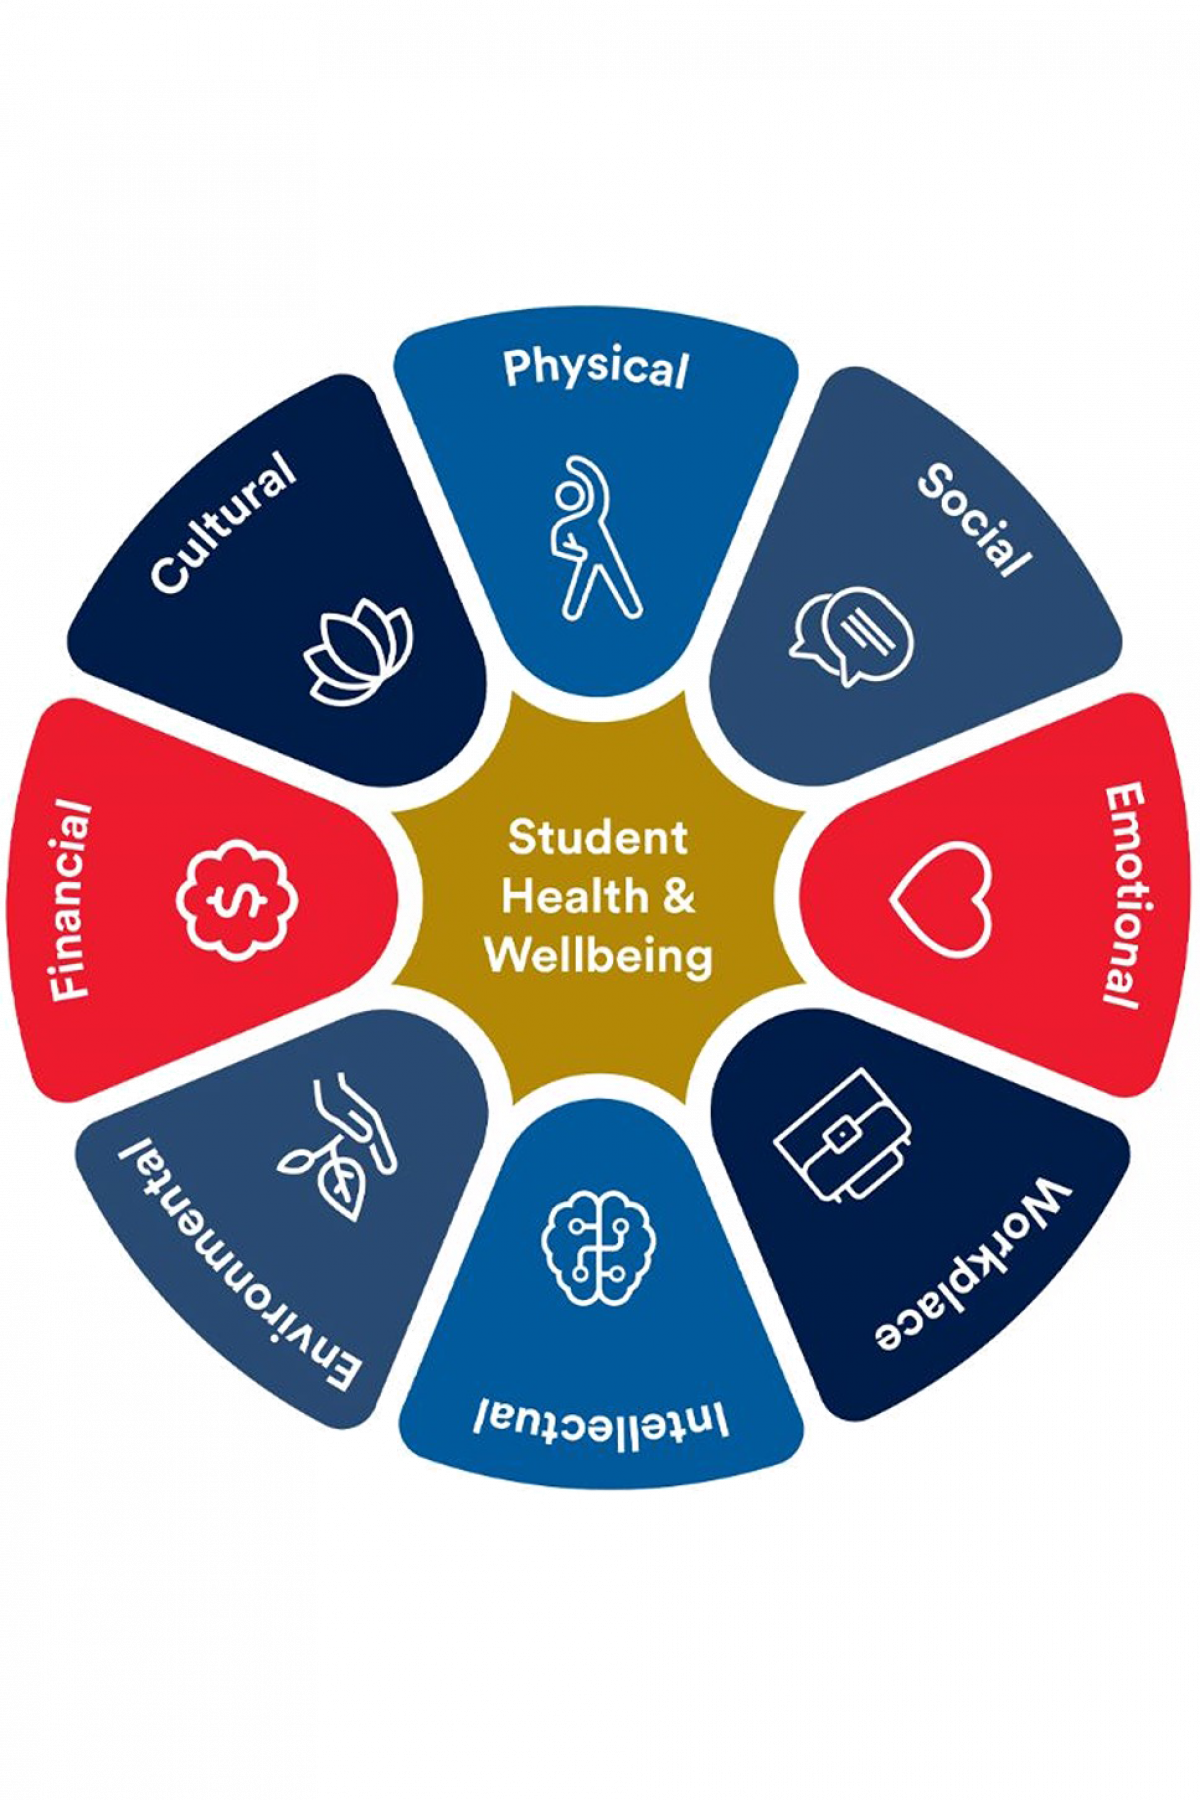 A wheel split into 8 dimensions, each representing a different aspect of Wellbeing